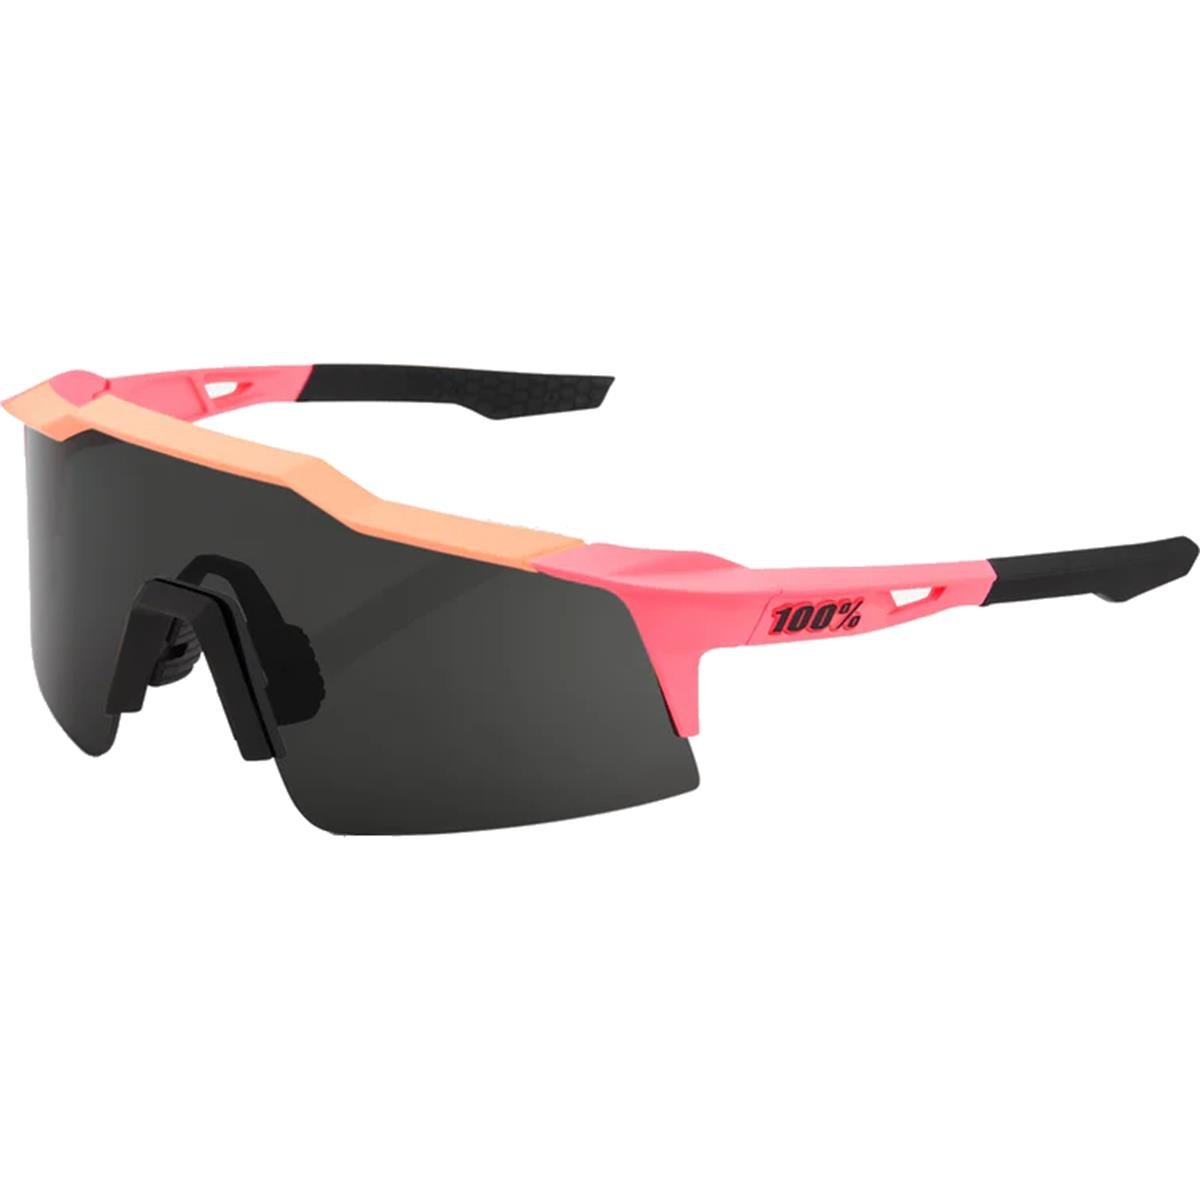 100% MTB Sport Glasses The Speedcraft SL Matte Washed Out Neon Pink - Smoke Lens